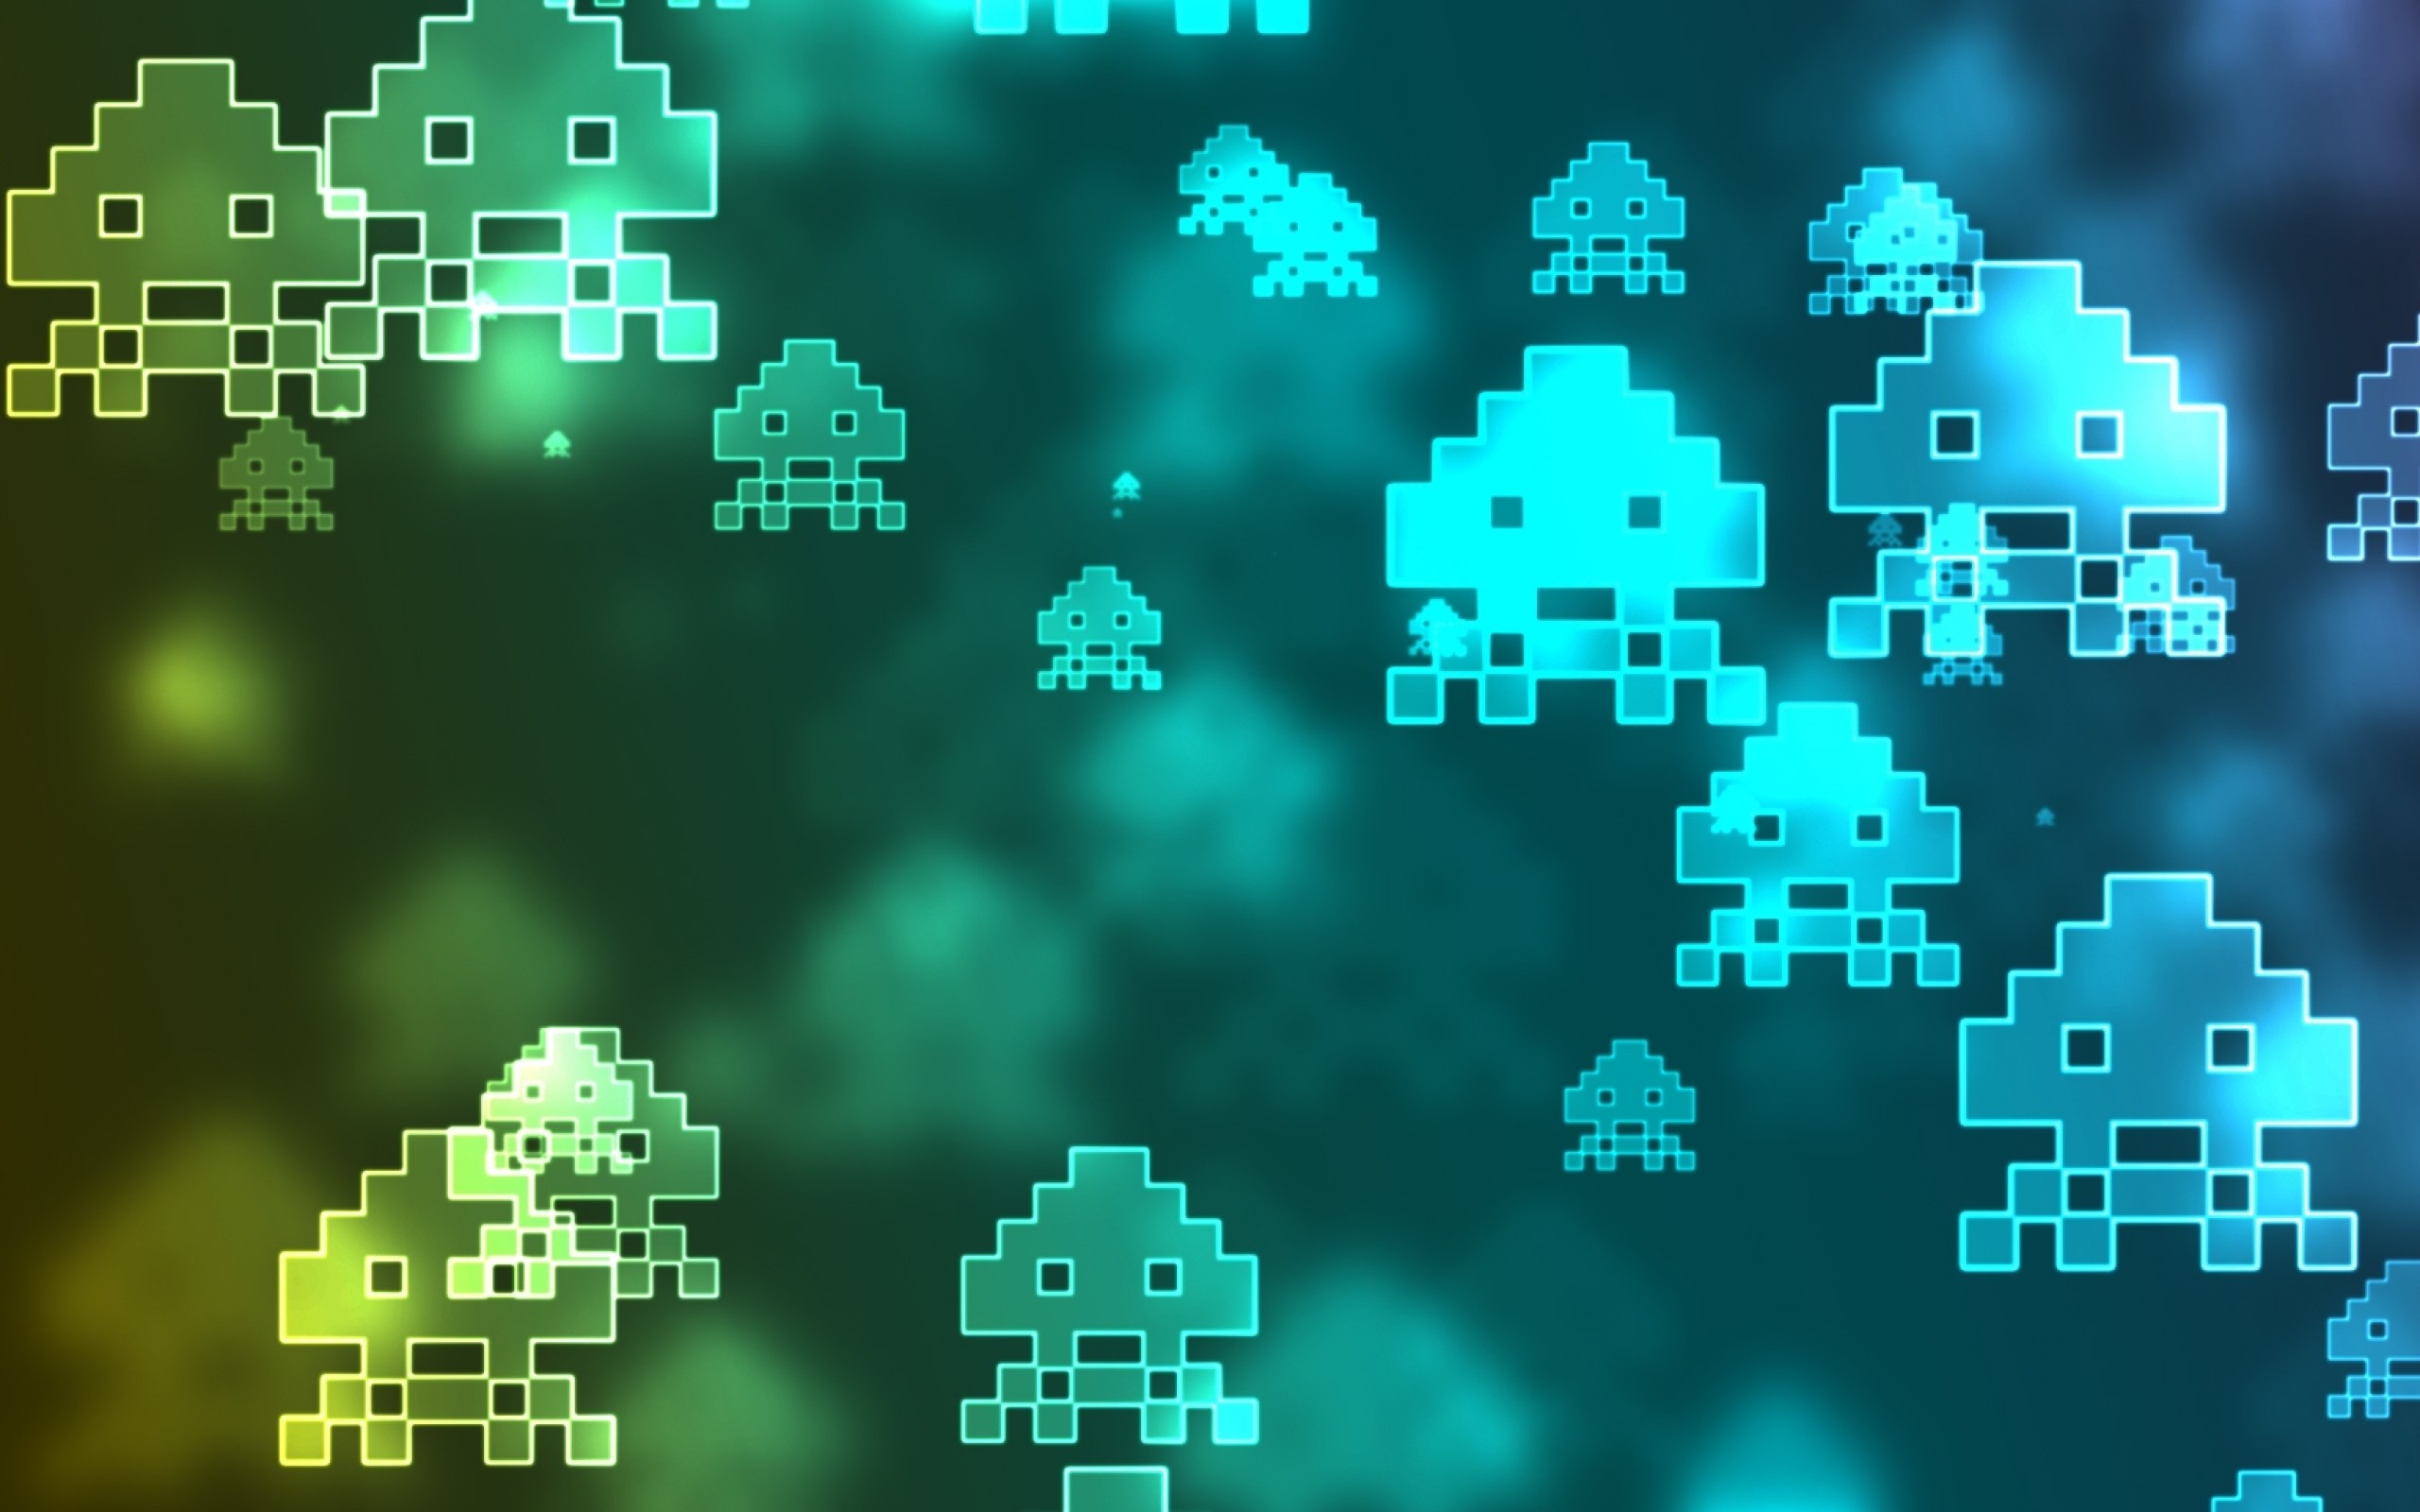 2560x1600 Space Invaders Wallpaper Background 52021